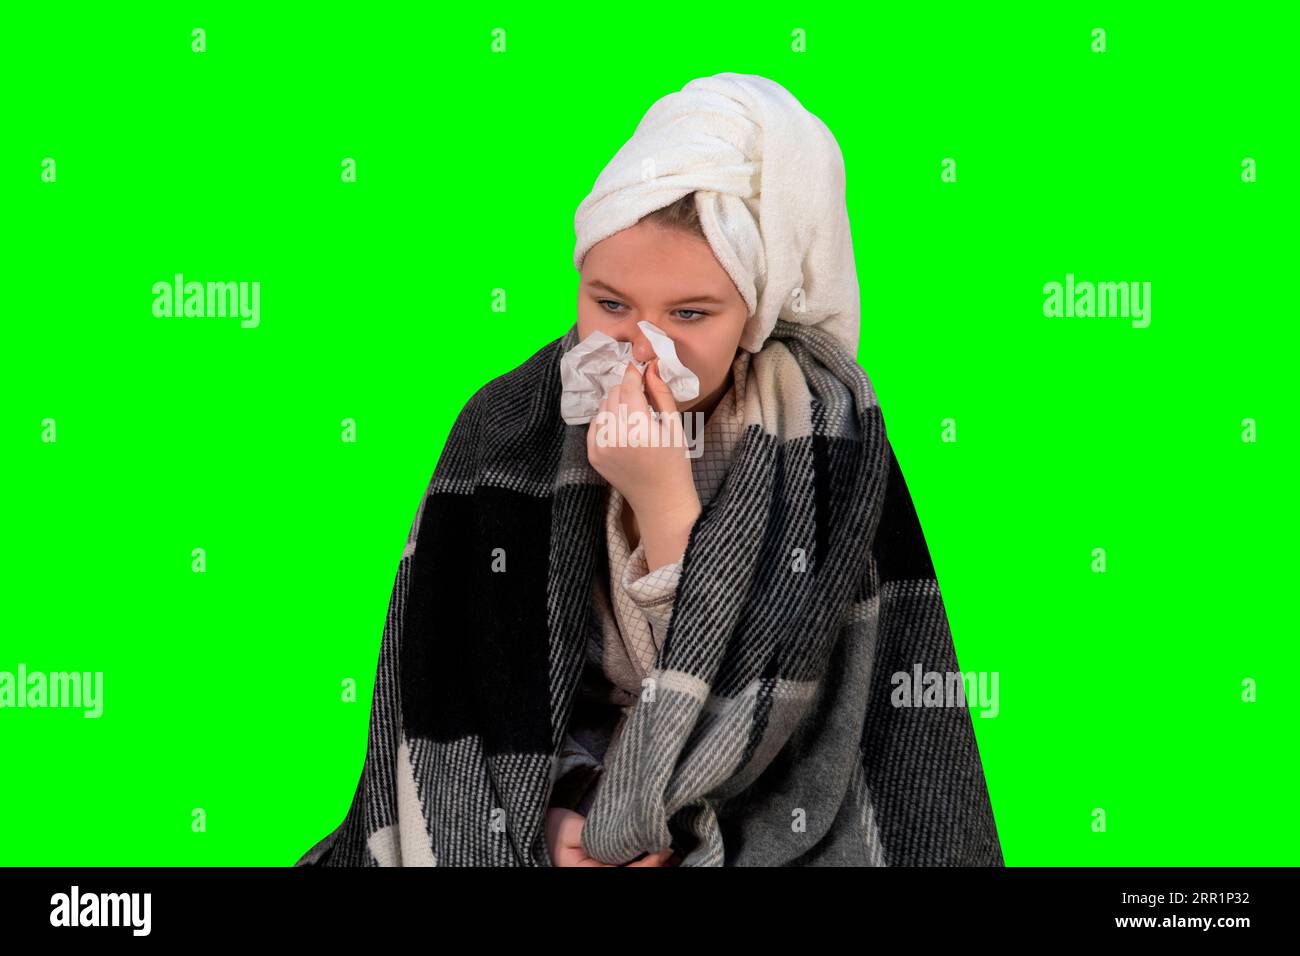 Girl with symptoms of a cold blows her nose into a paper handkerchief on a green background (chroma key). Concept of healthcare, and home treatment Stock Photo